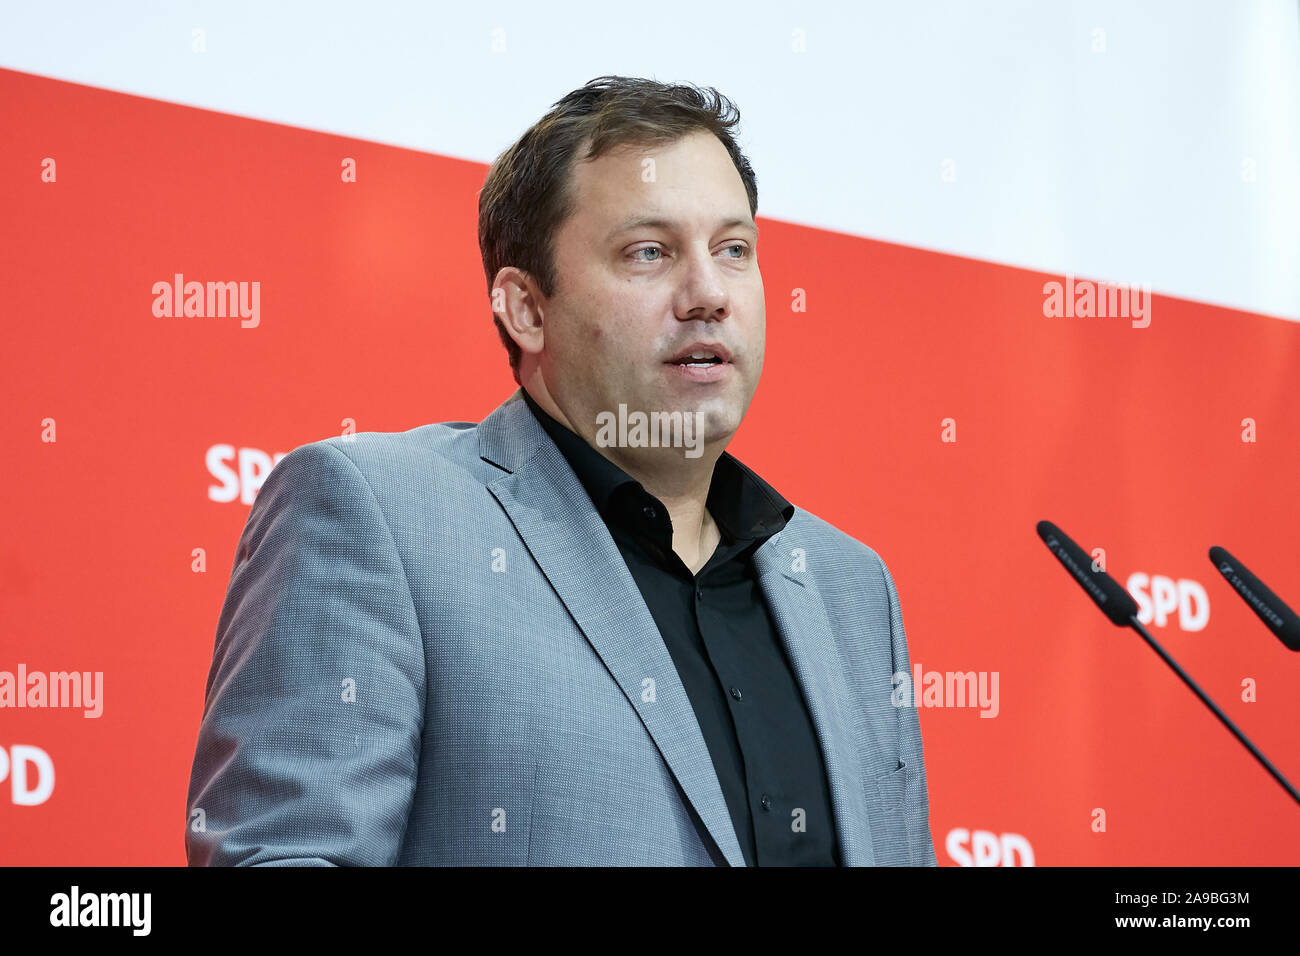 14.10.2019, Berlin, Berlin, Germany - Lars Klingbeil, Secretary General of the SPD at a press conference in the Willy Brandt House. 00R191014D045CAROE Stock Photo